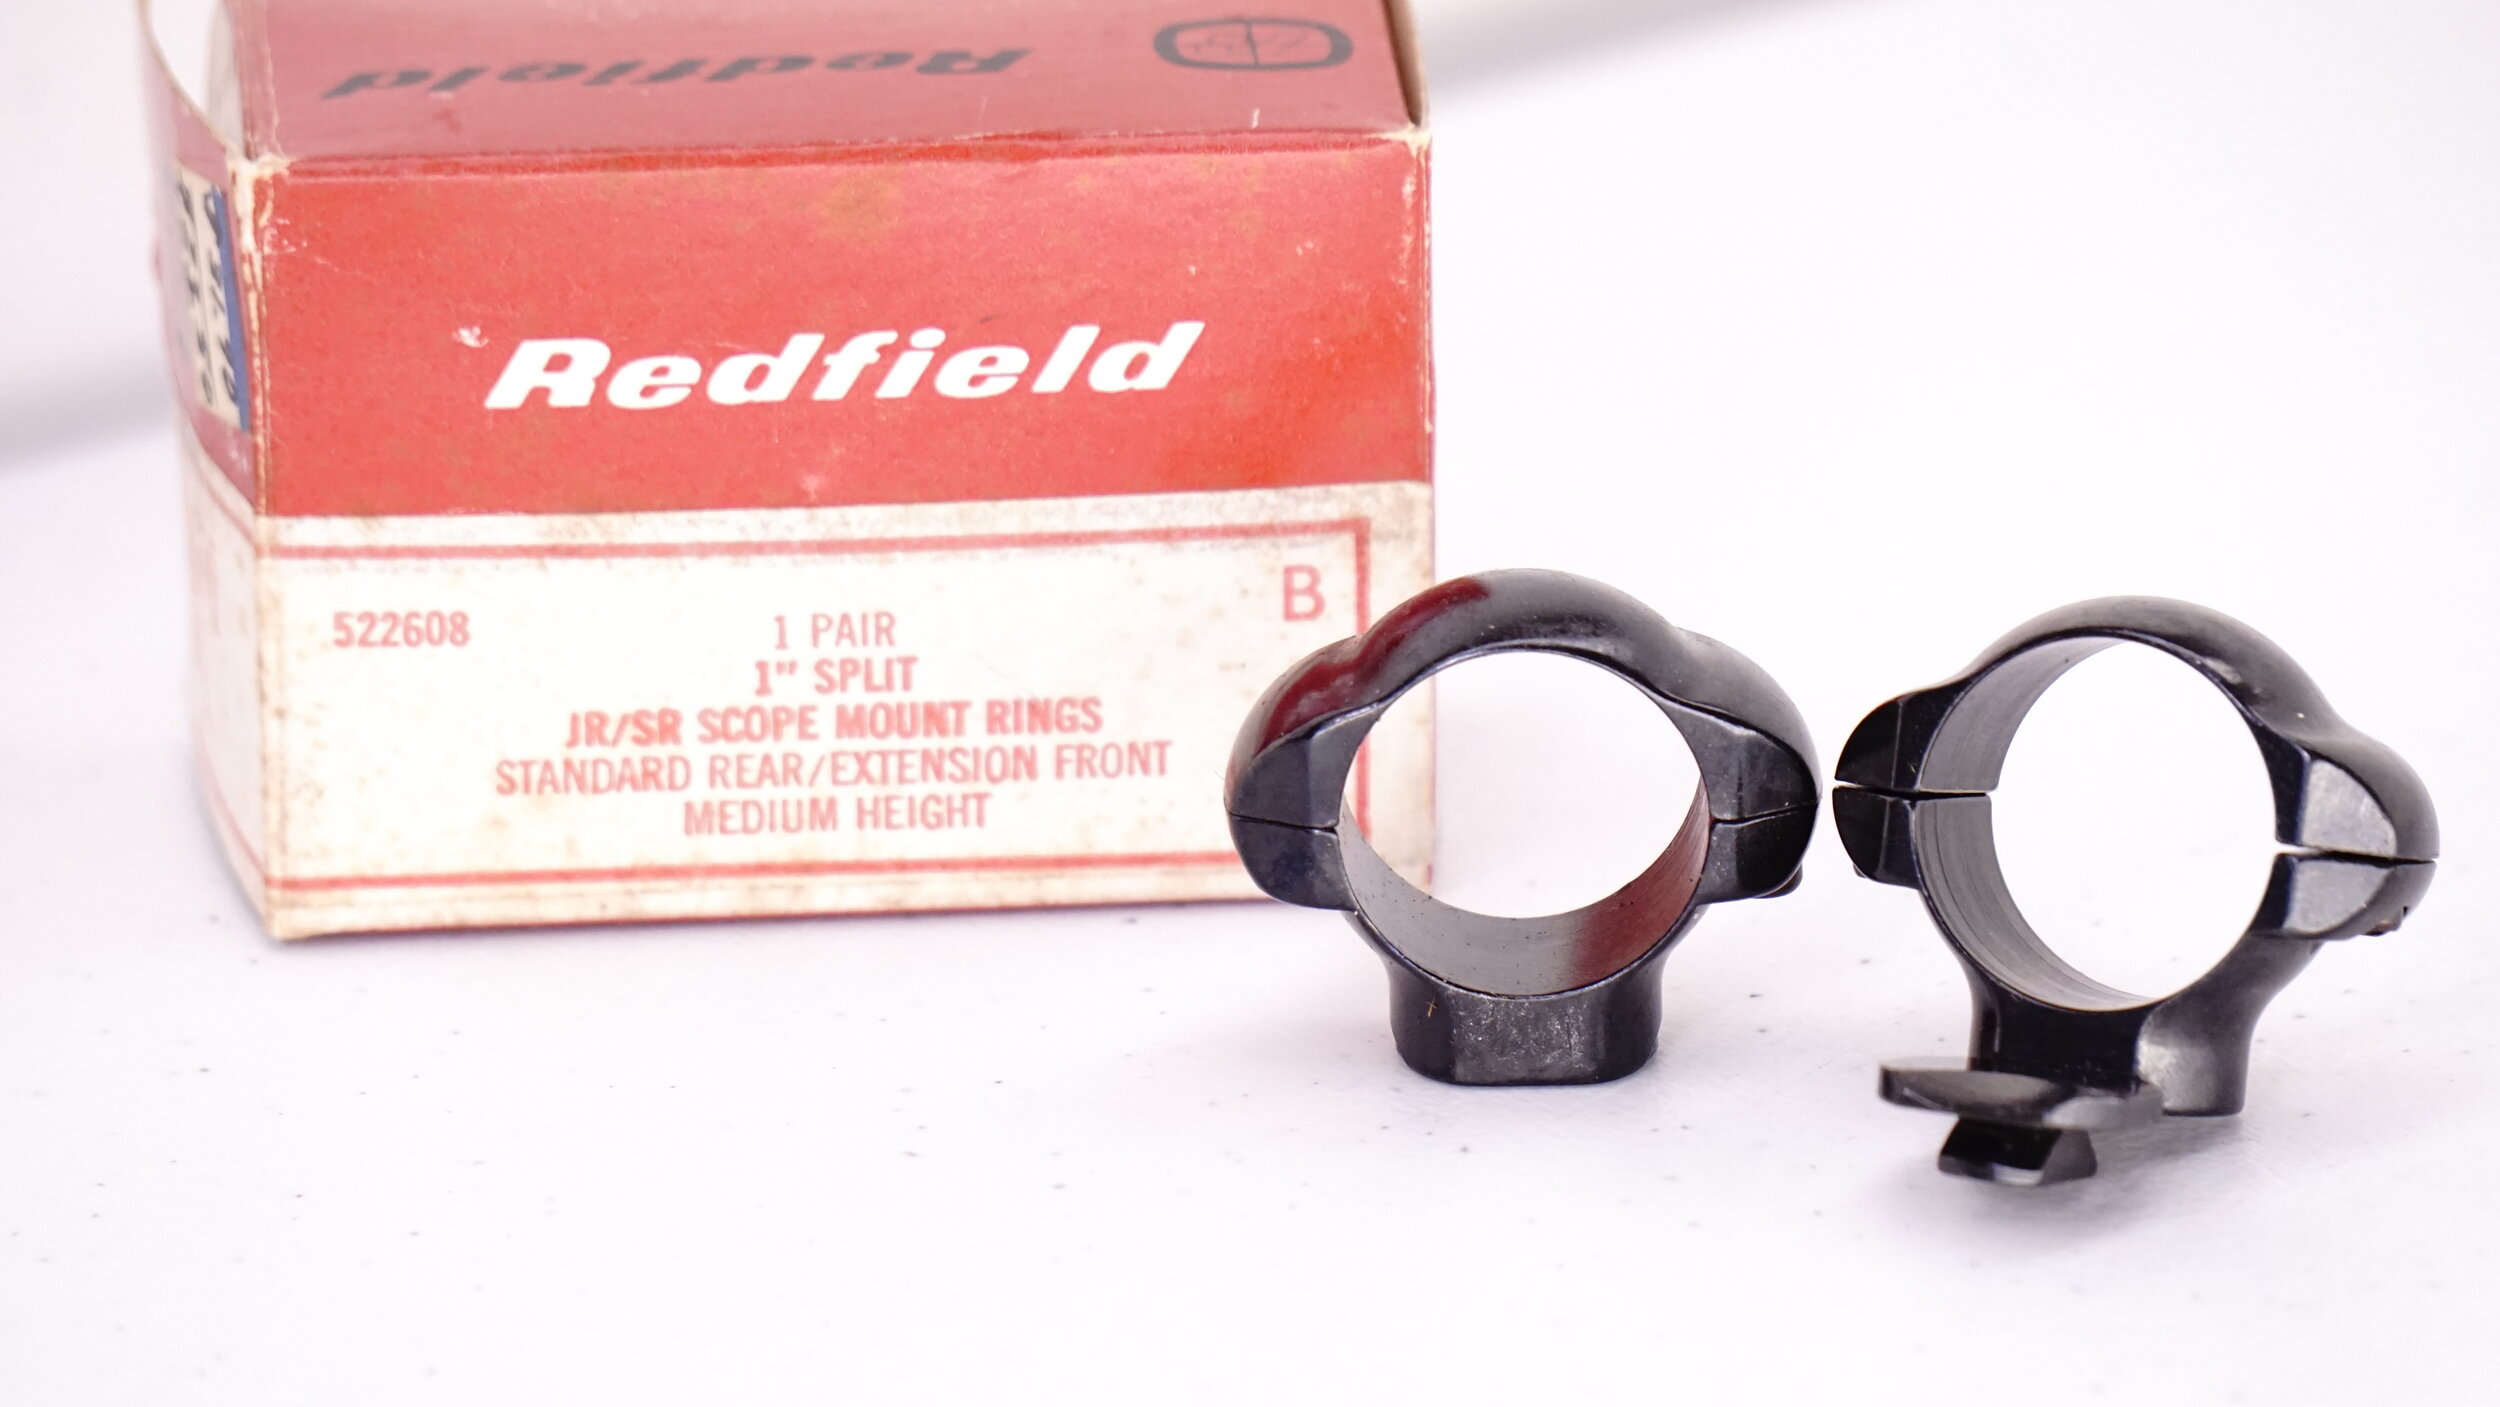 Redfield 47220 Rifle scope Rings 1" Dovetail Extension Front and Standard Rear